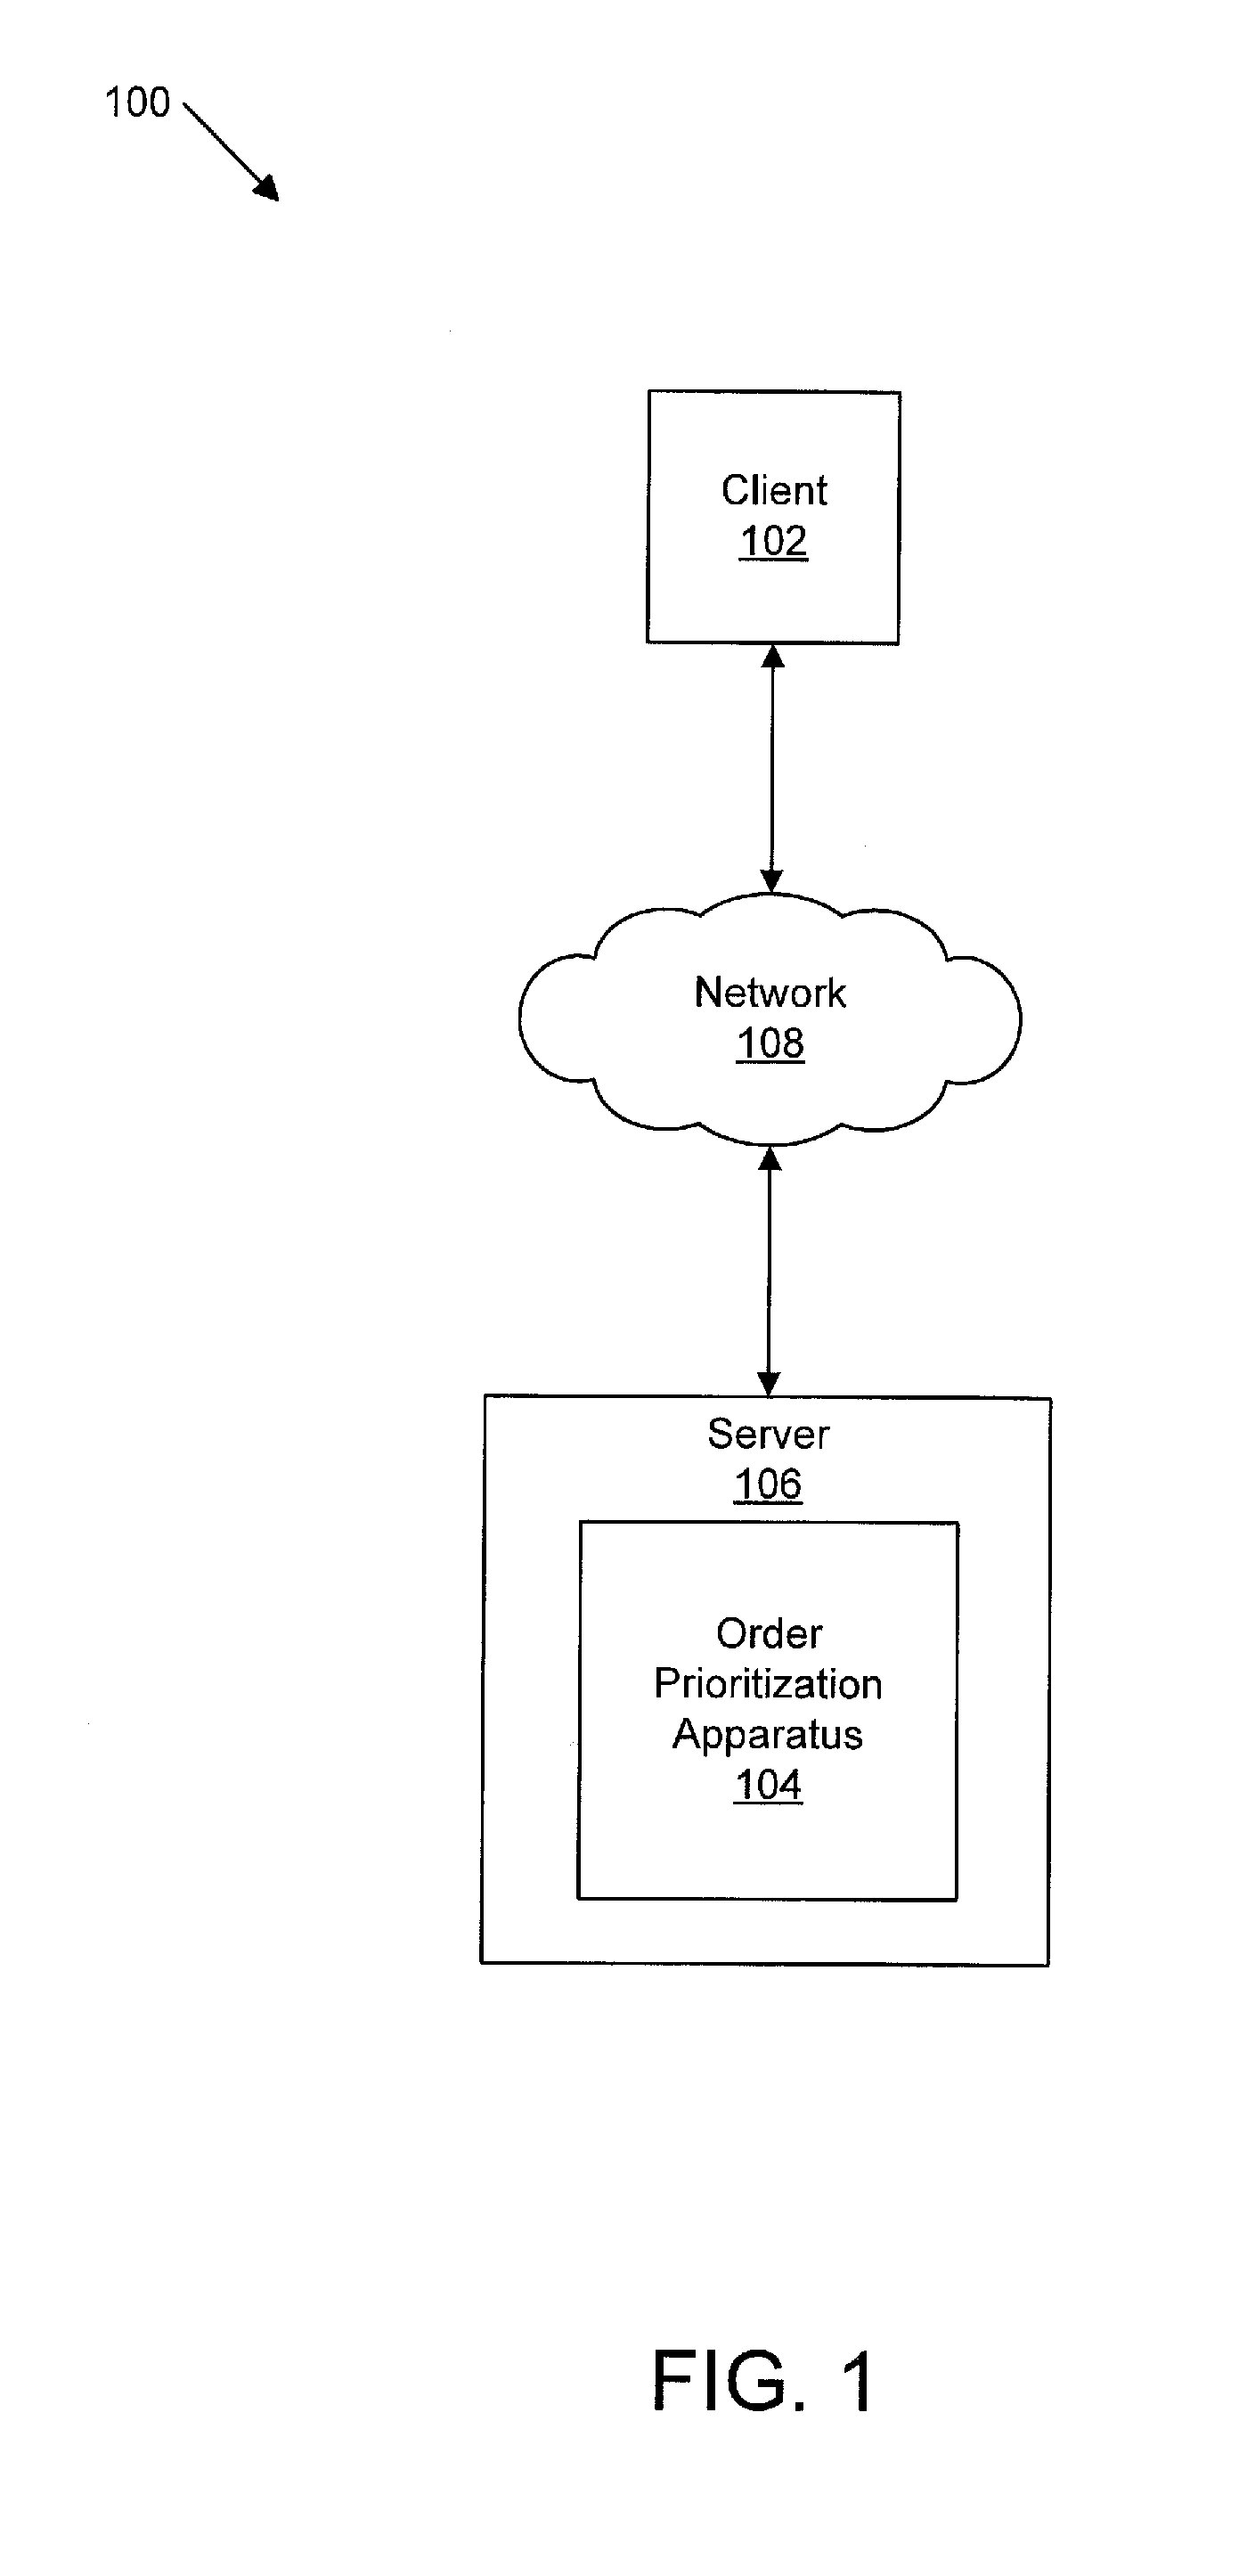 Decision support system for order prioritization